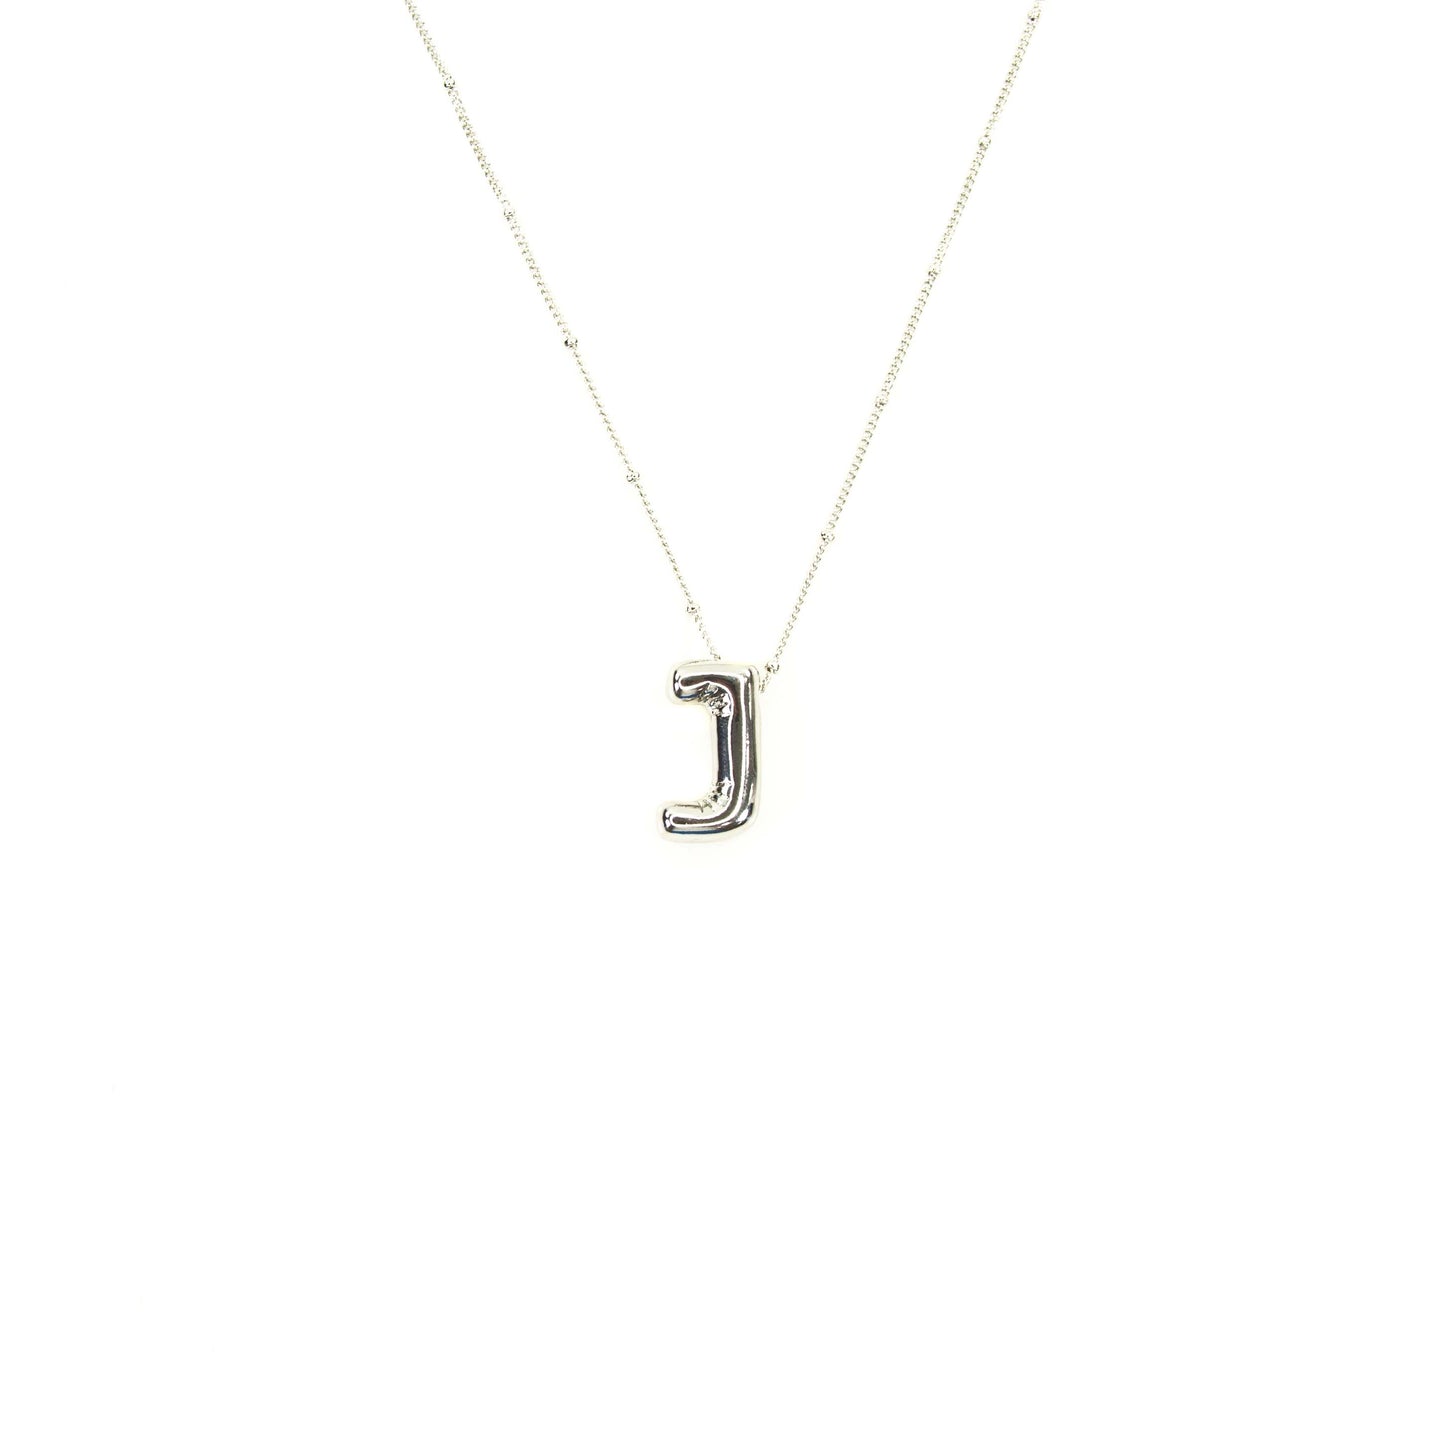 Initial Balloon Bubble Silver Necklace: N